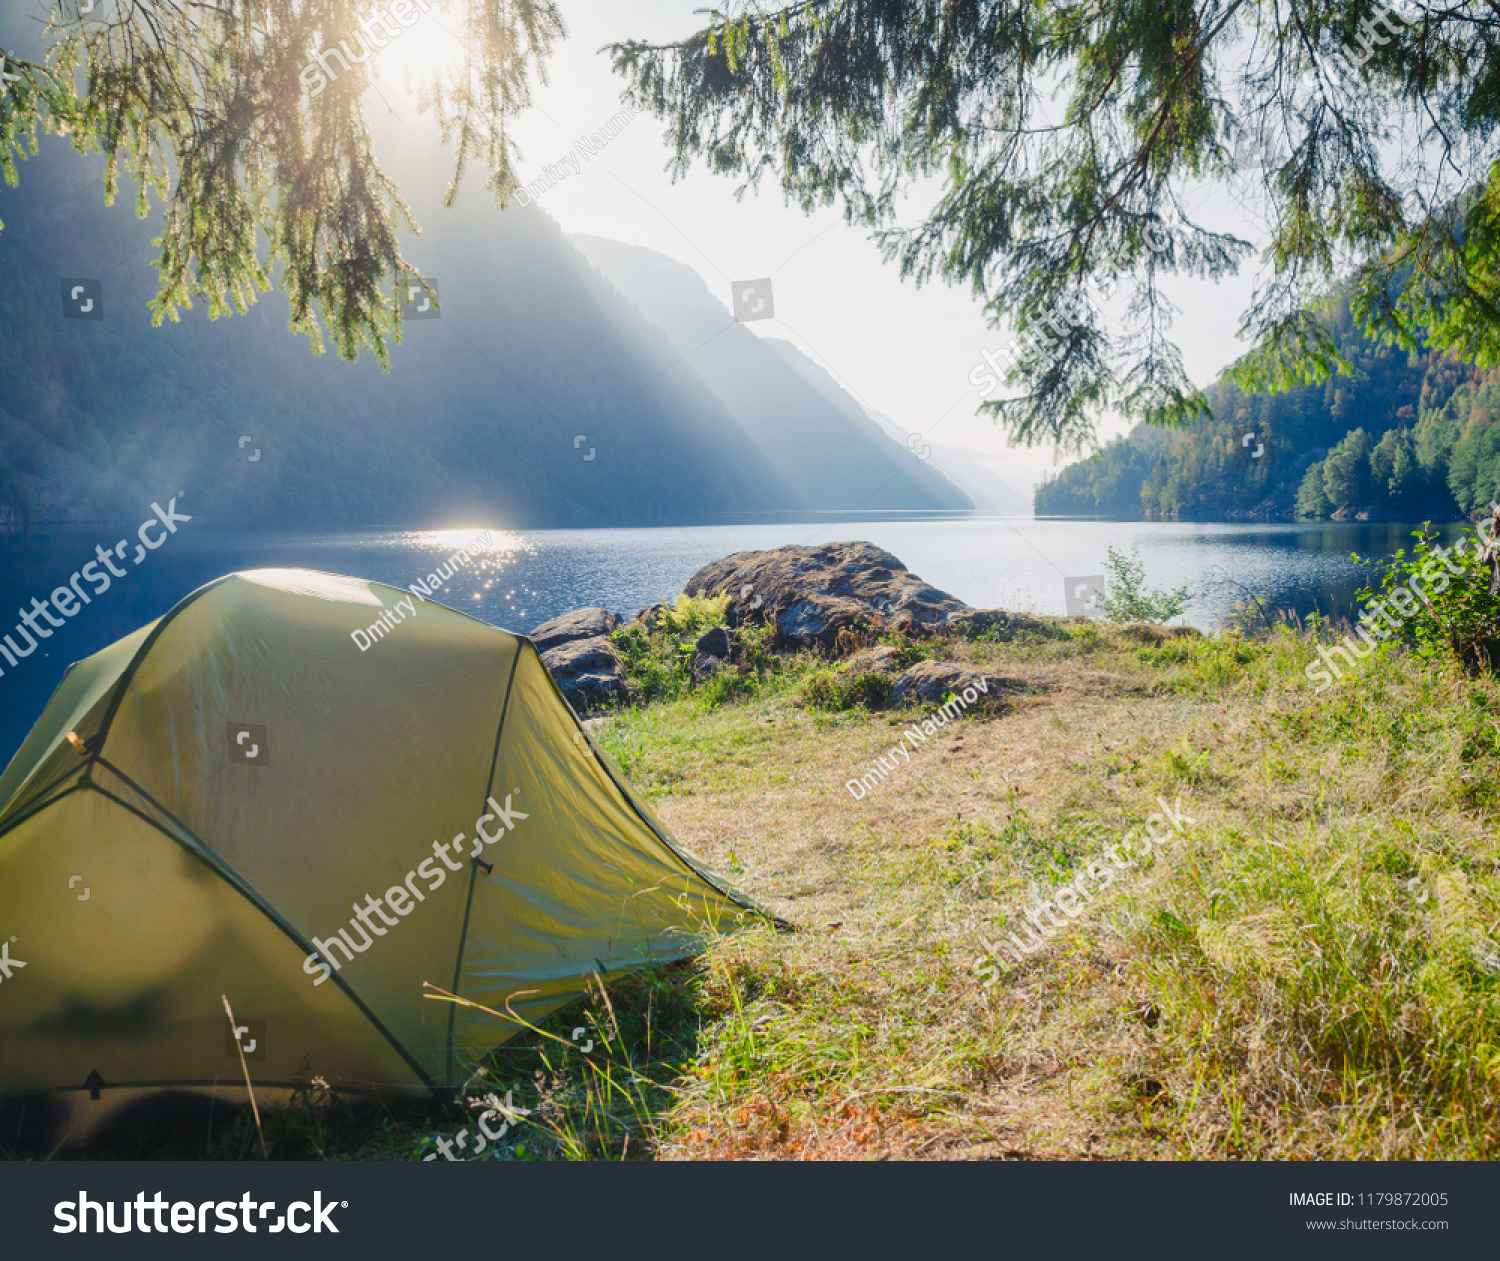 Sunlit camping tent at scenic campsite on a lake shore with mountain range in background - wild camping in Norway #1179872005